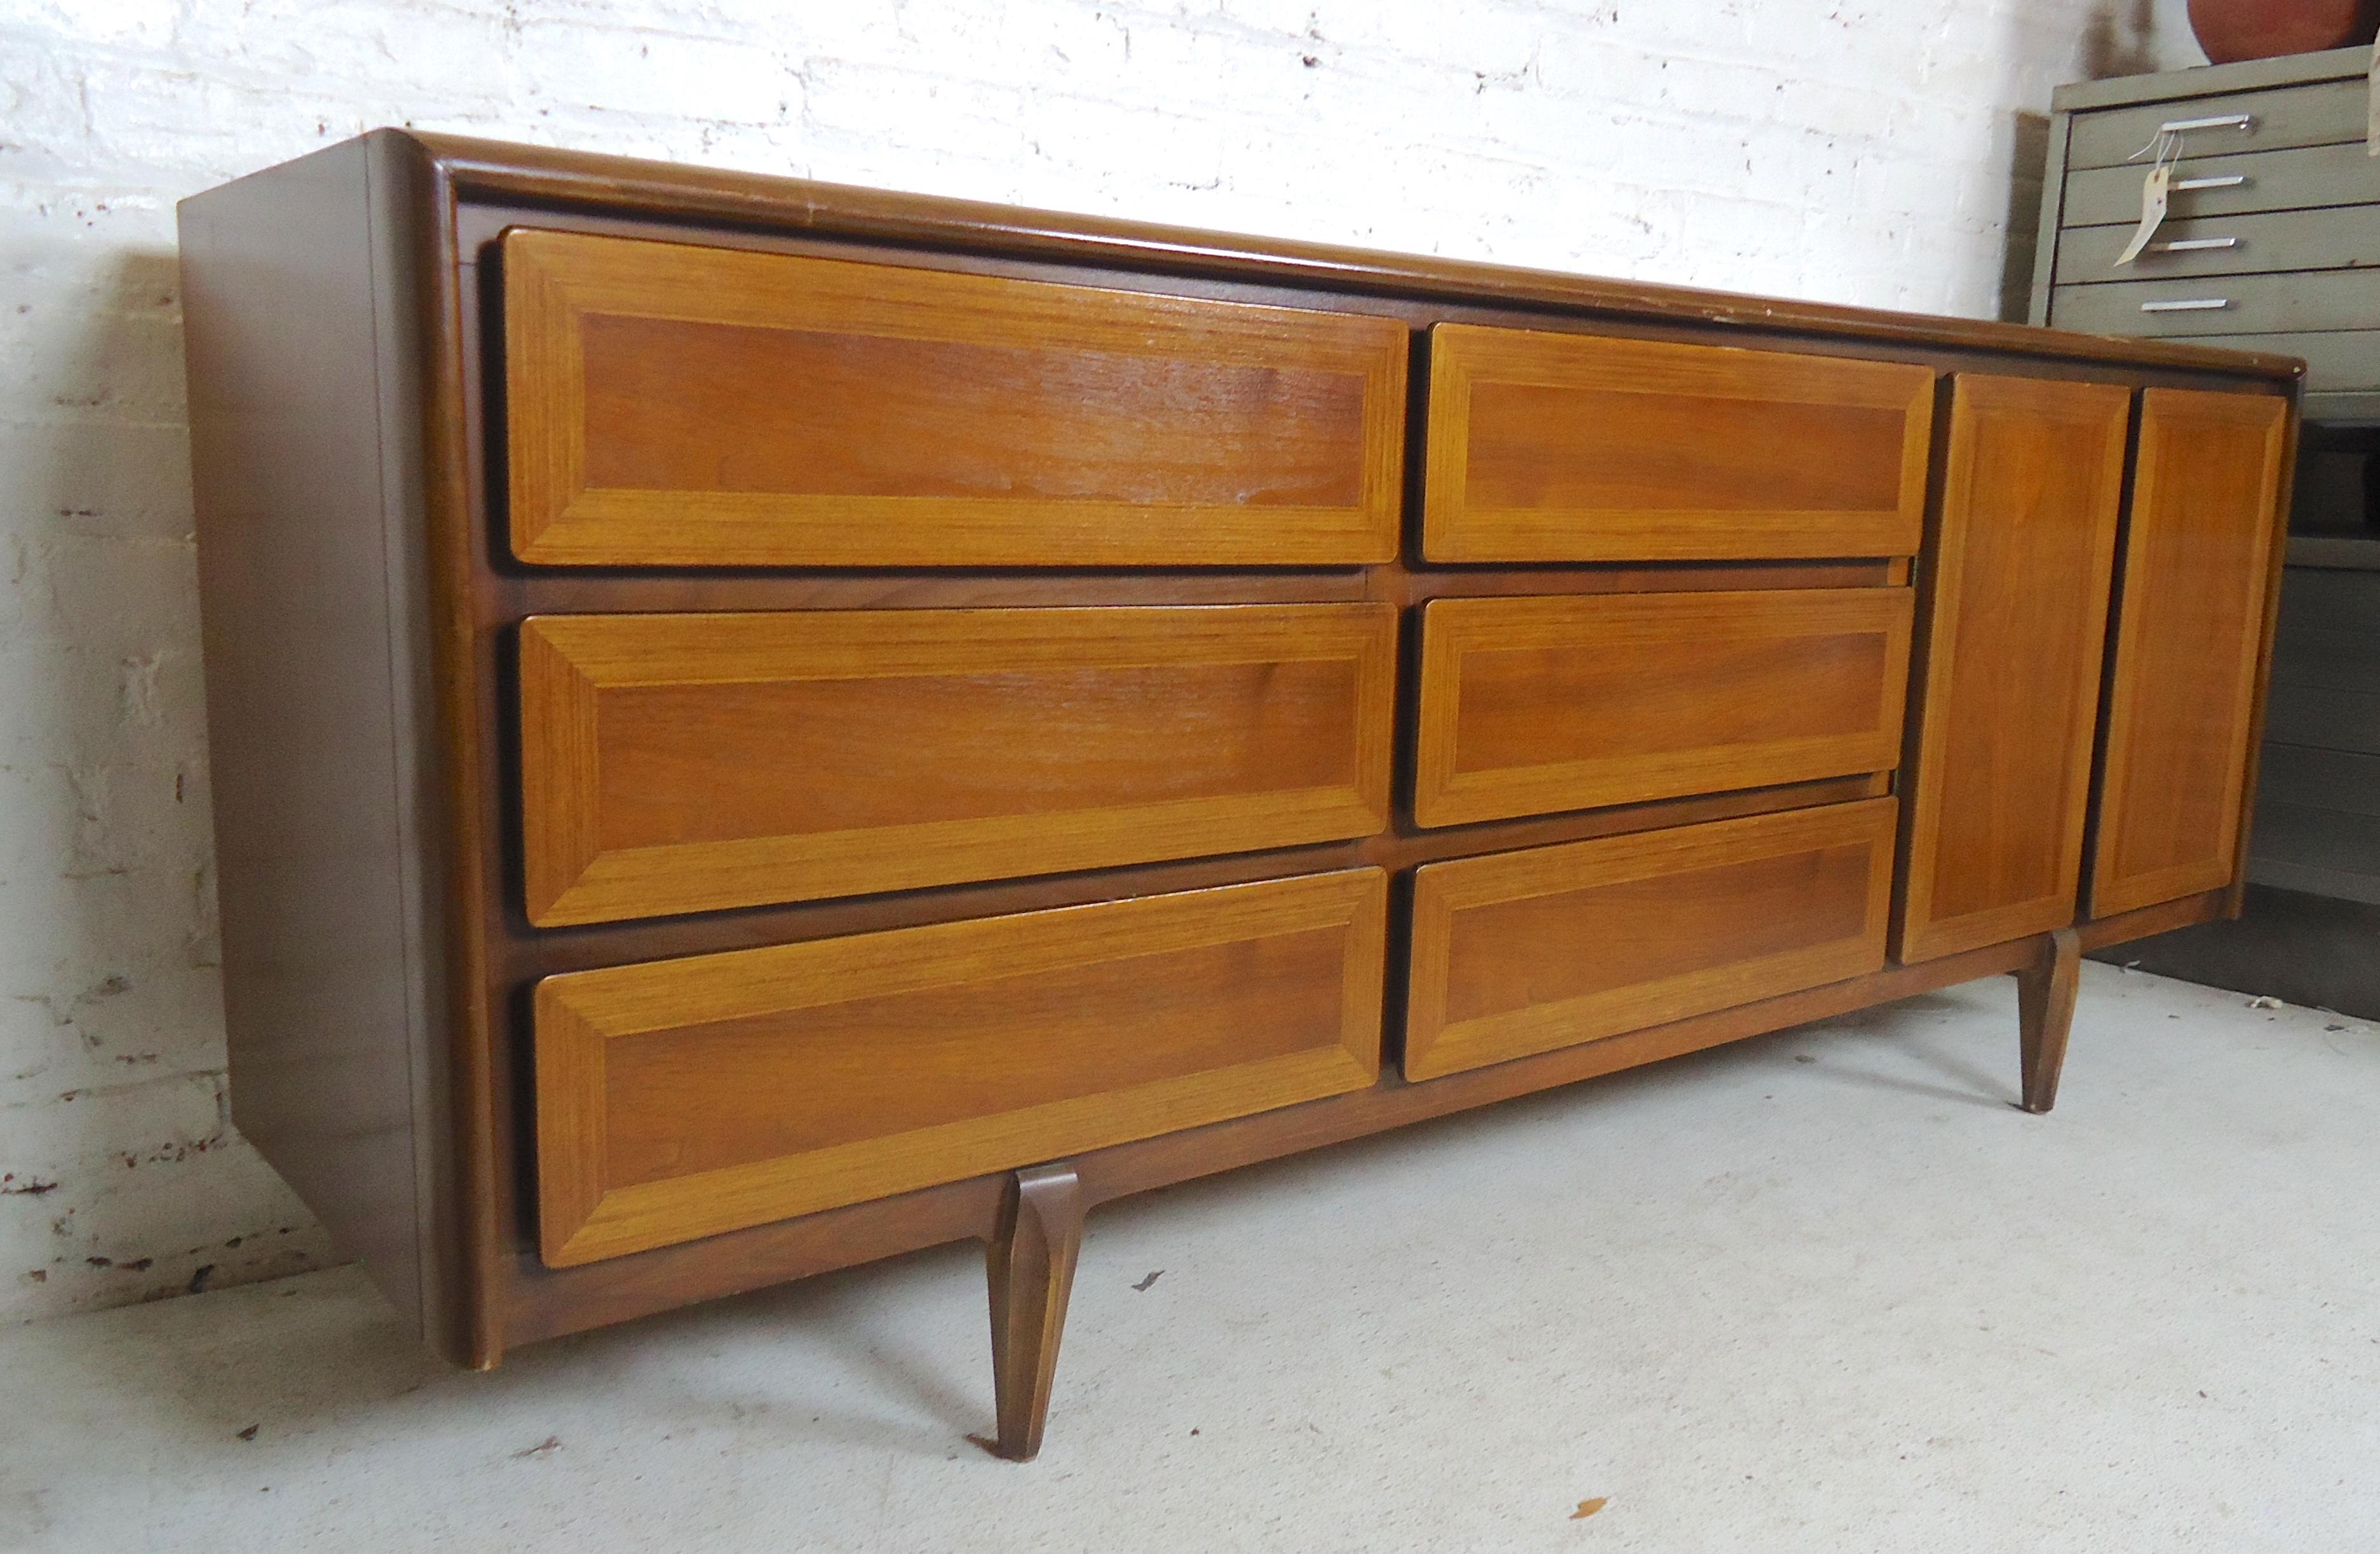 Long modern style dresser with nine drawers. Walnut wood with oak trim.
(Please confirm item location - NY or NJ - with dealer).    
   